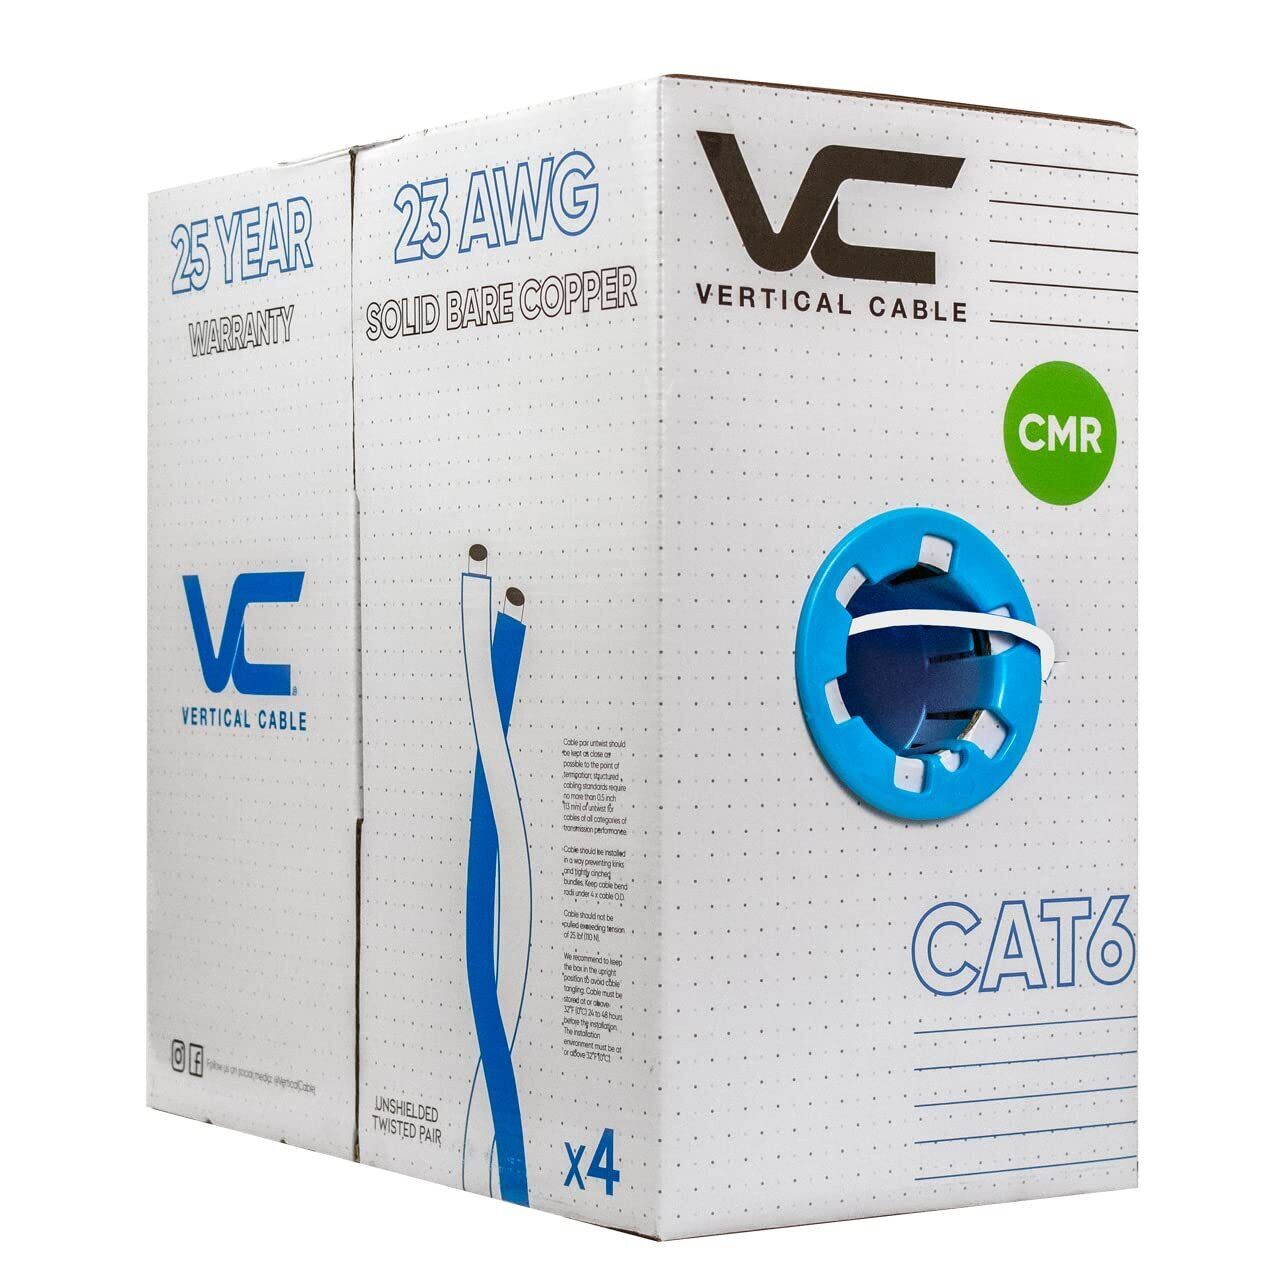 Vertical Cable Cat6 Ethernet Cable, 23AWG, UTP - White - 1000ft in Pull Box